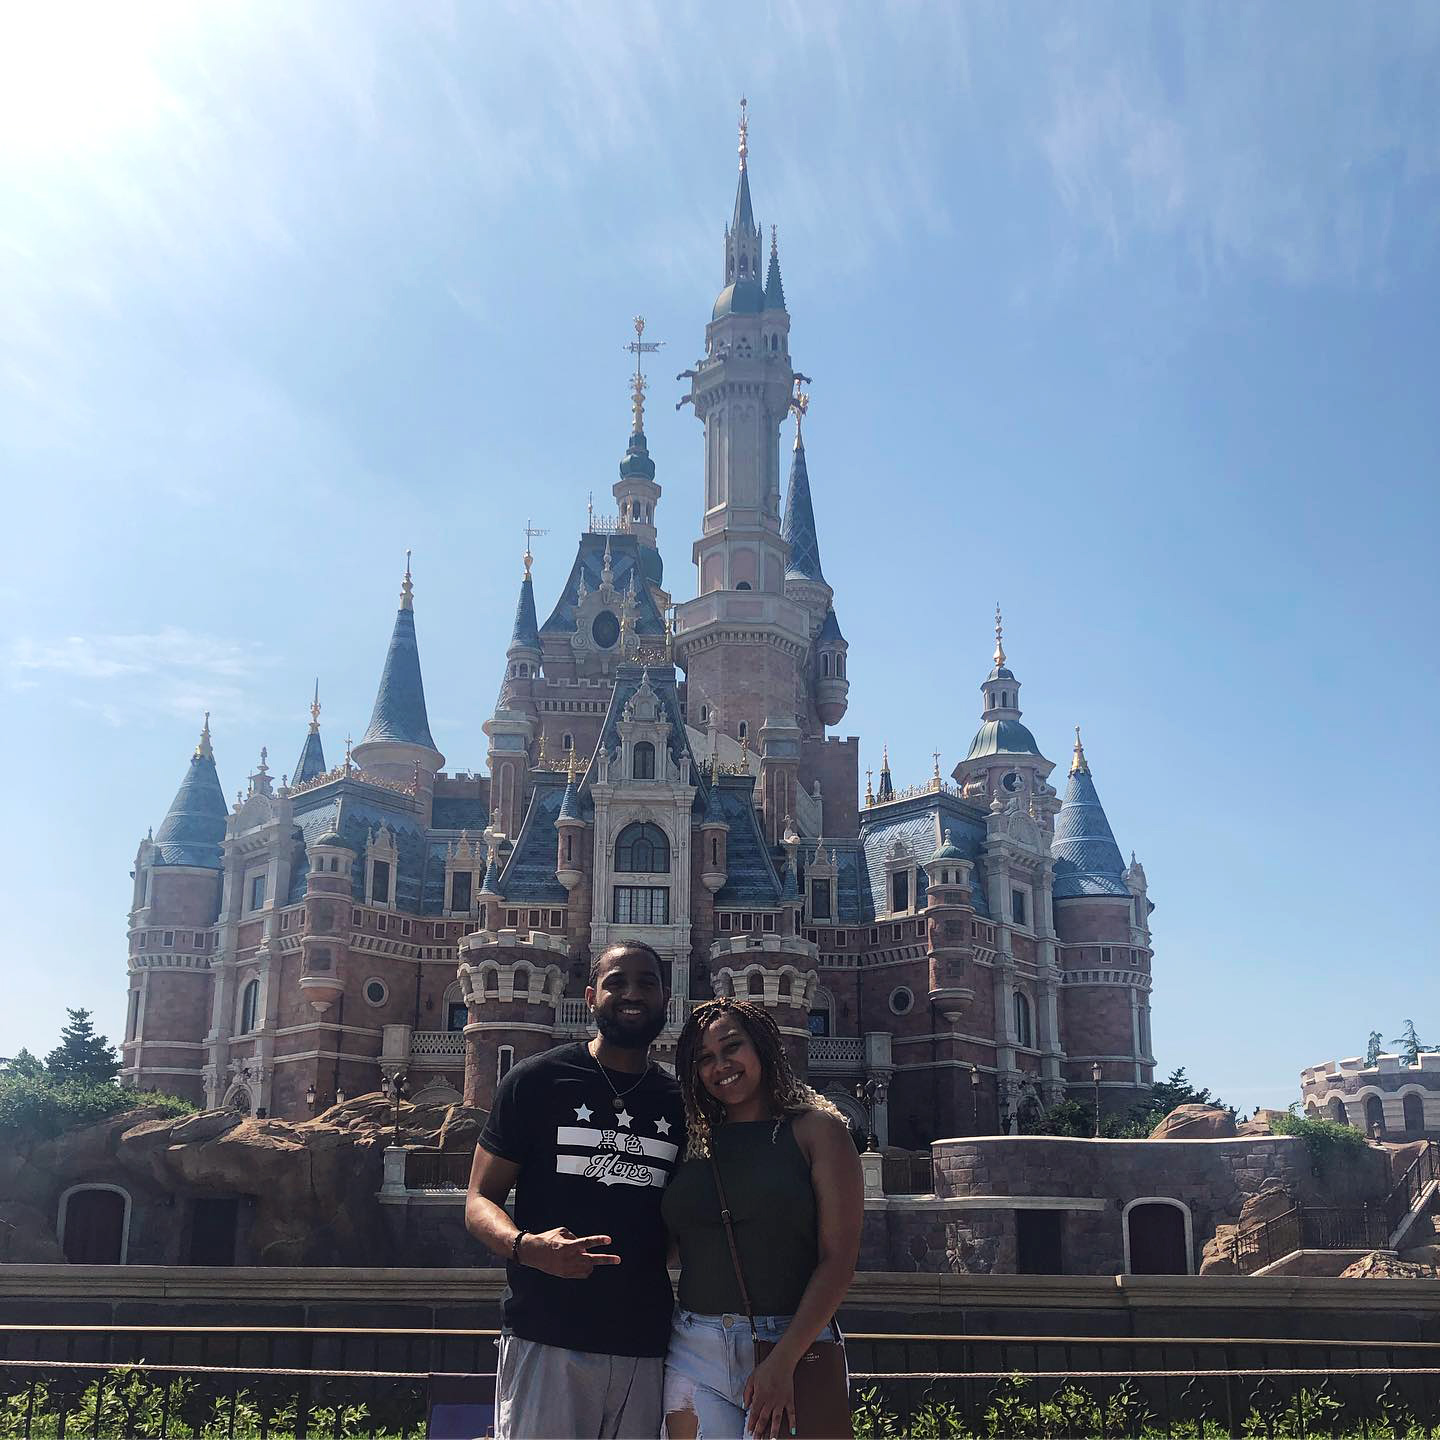 PHOTO: Teacher Brandon Woolfolk is pictured with his girlfriend, Dominique Duarte, at Shanghai Disneyland in China.